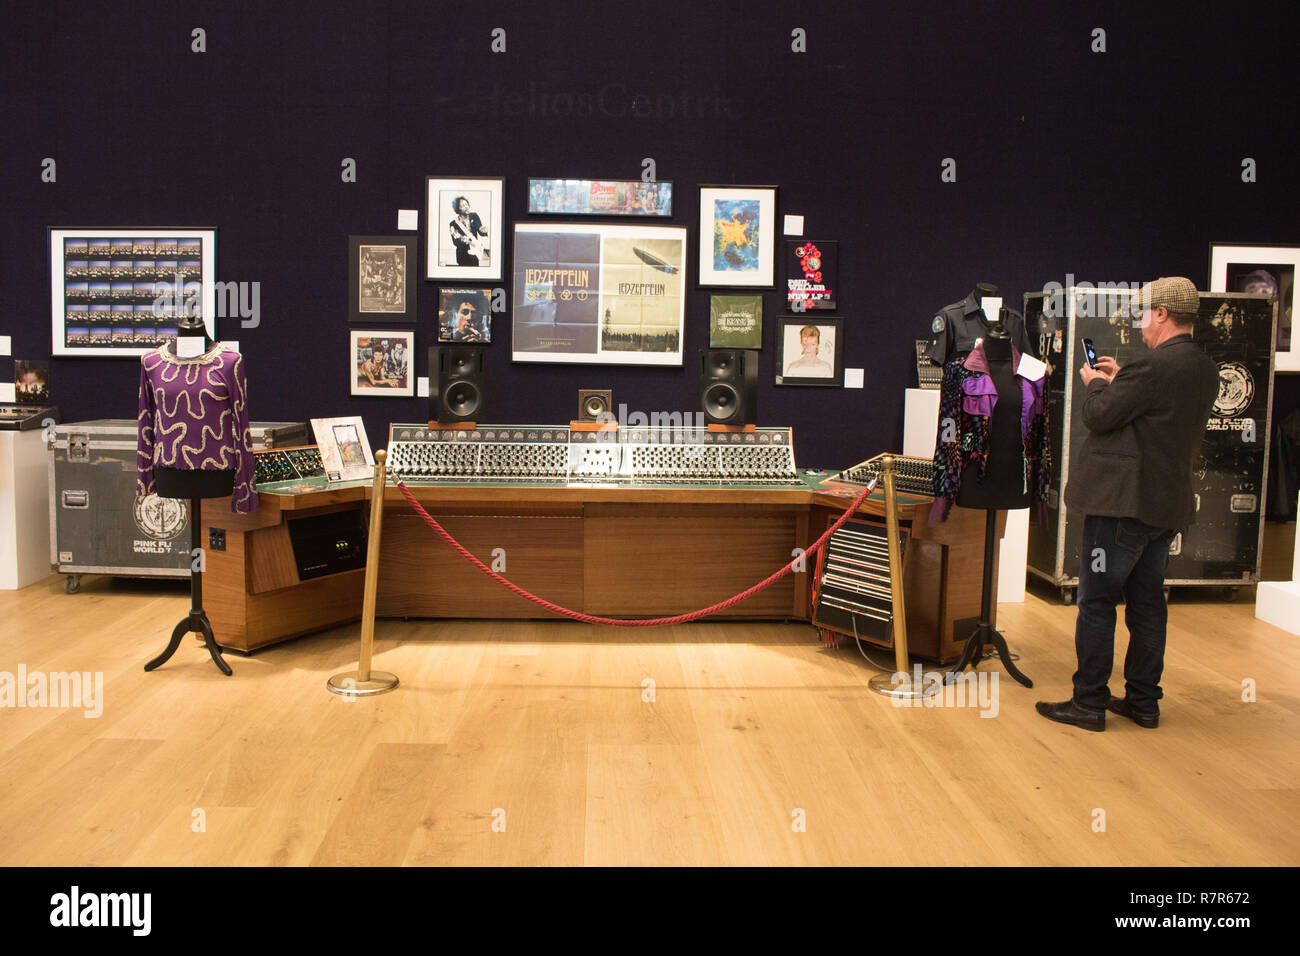 London UK. 11th December 2018. A unique Helios Centric Console used By Rock Music Legends, Led Zeppelin, Bob Marley, David Bowie, Eric Clapton, George Harrison, Rolling Stones, Paul Weller, Jimi Hendrix and other celebrity users. Credit: amer ghazzal/Alamy Live News Stock Photo